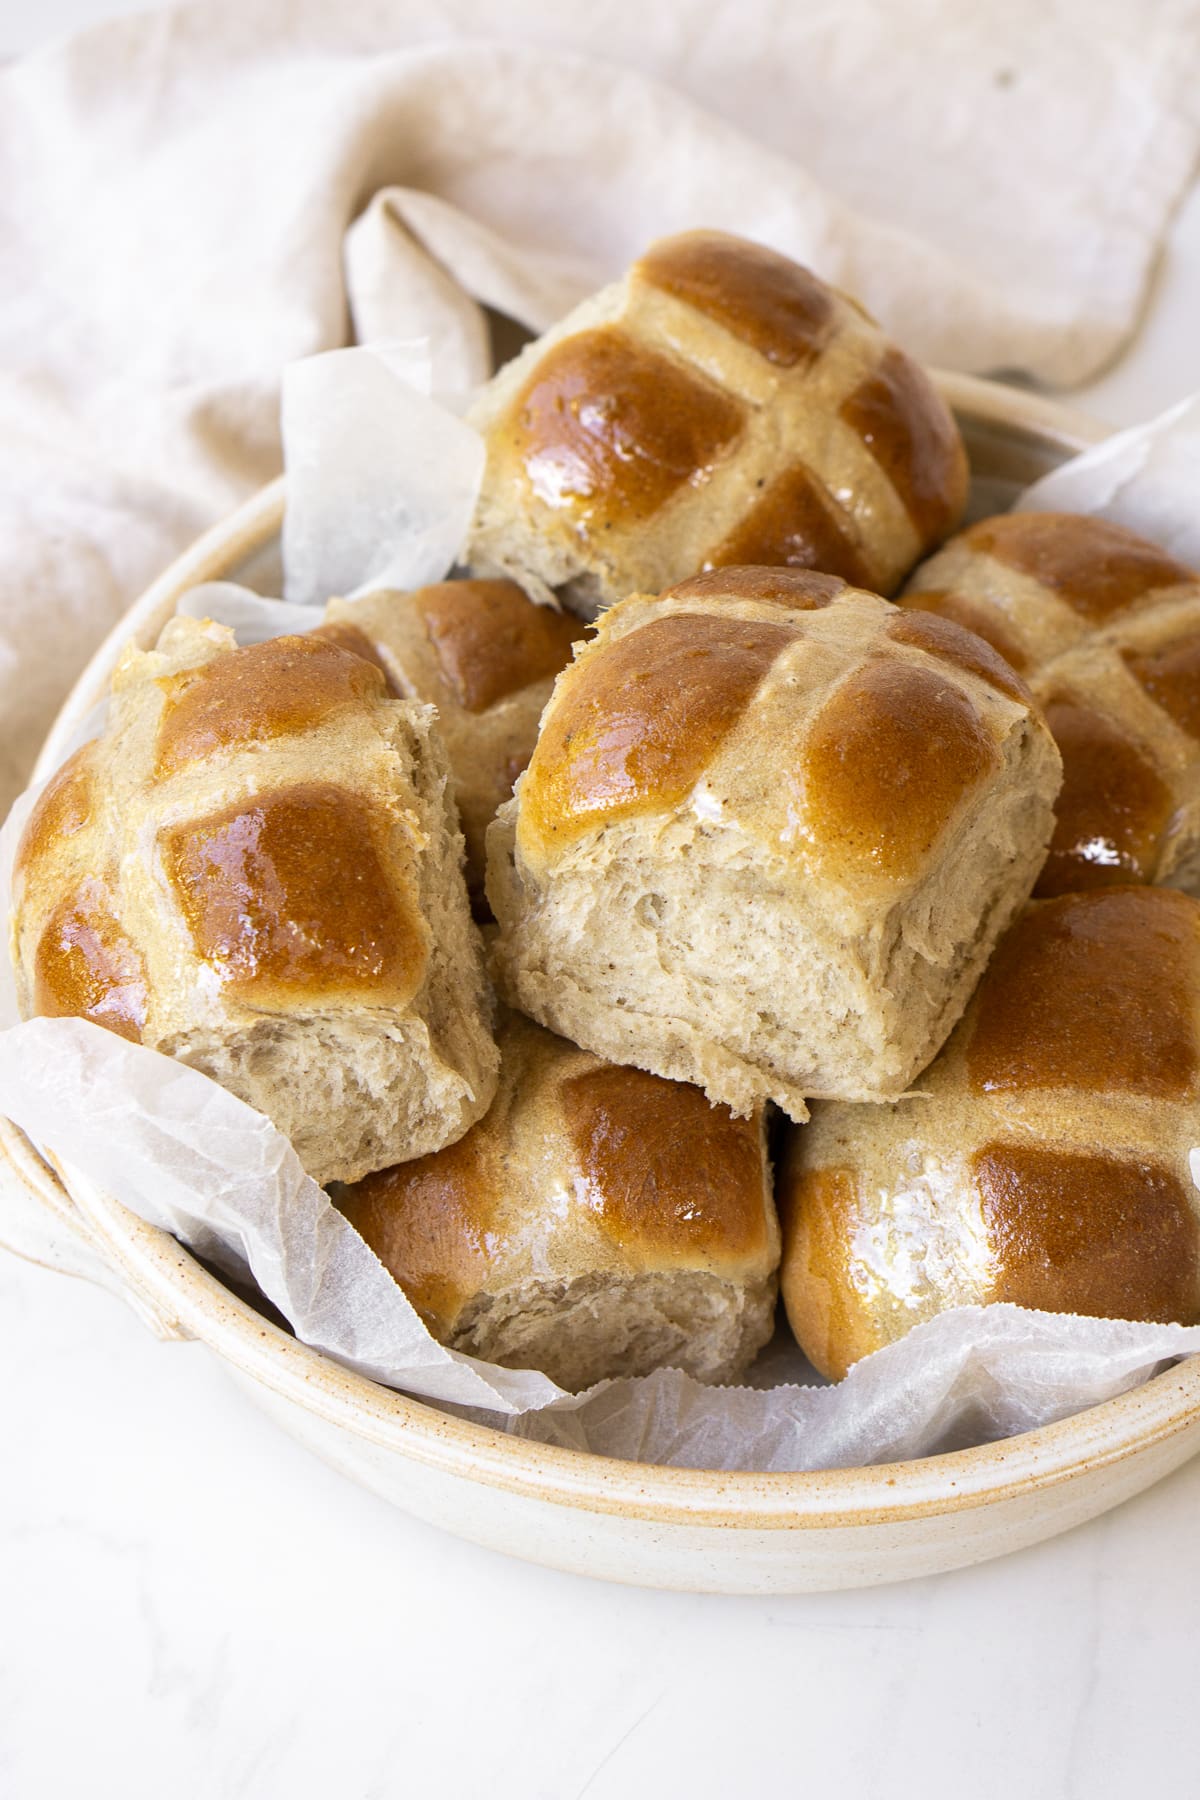 Freshly baked chai spiced hot crossed buns.